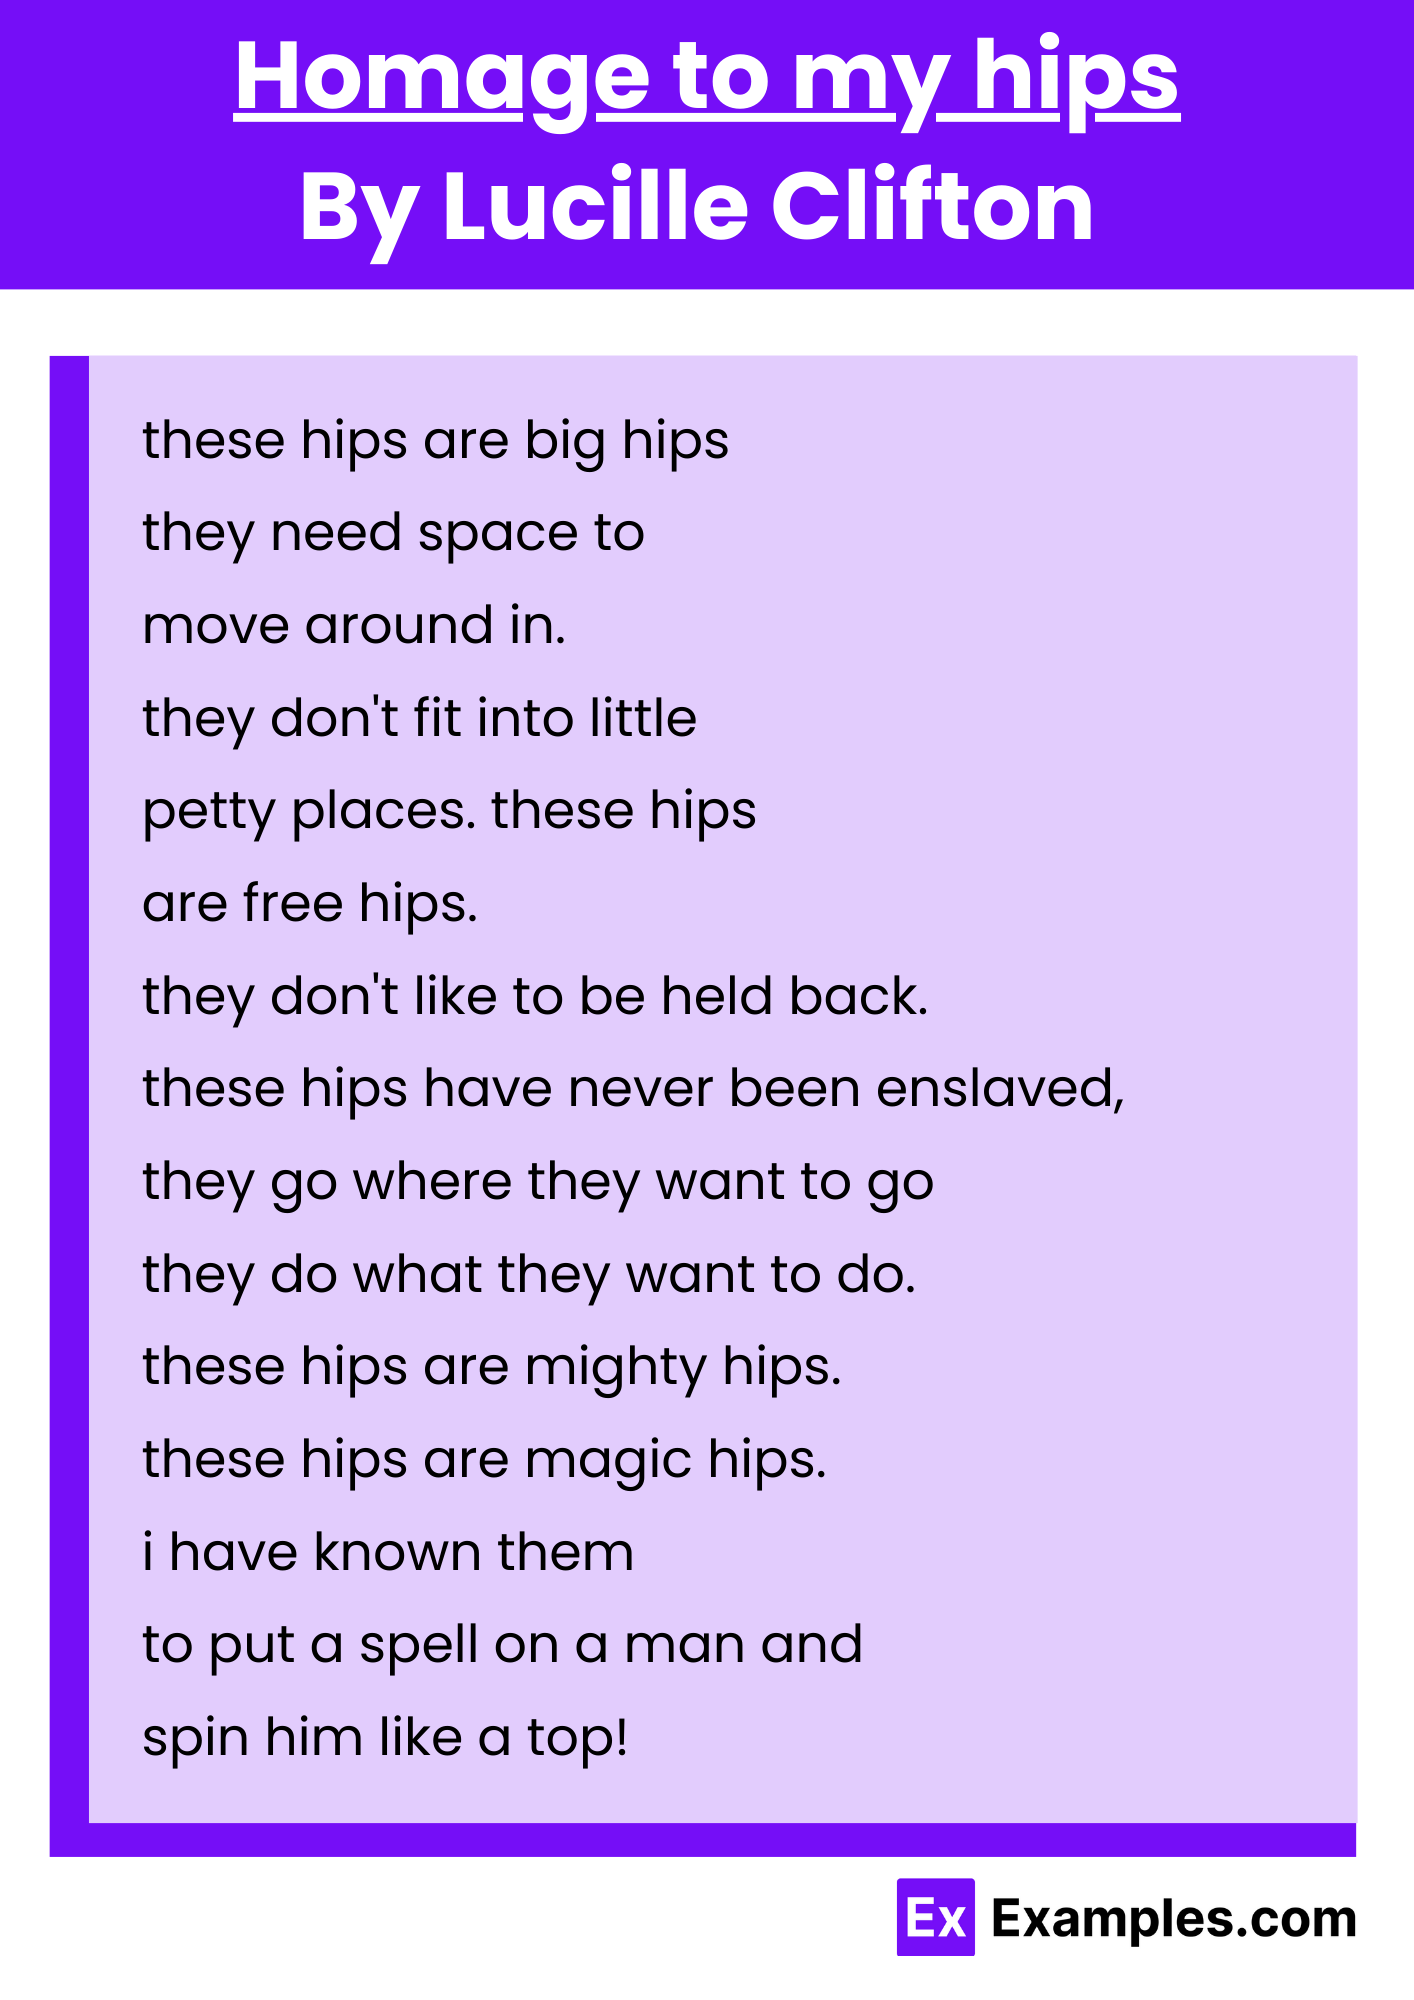 Homage to my hips By Lucille Clifton